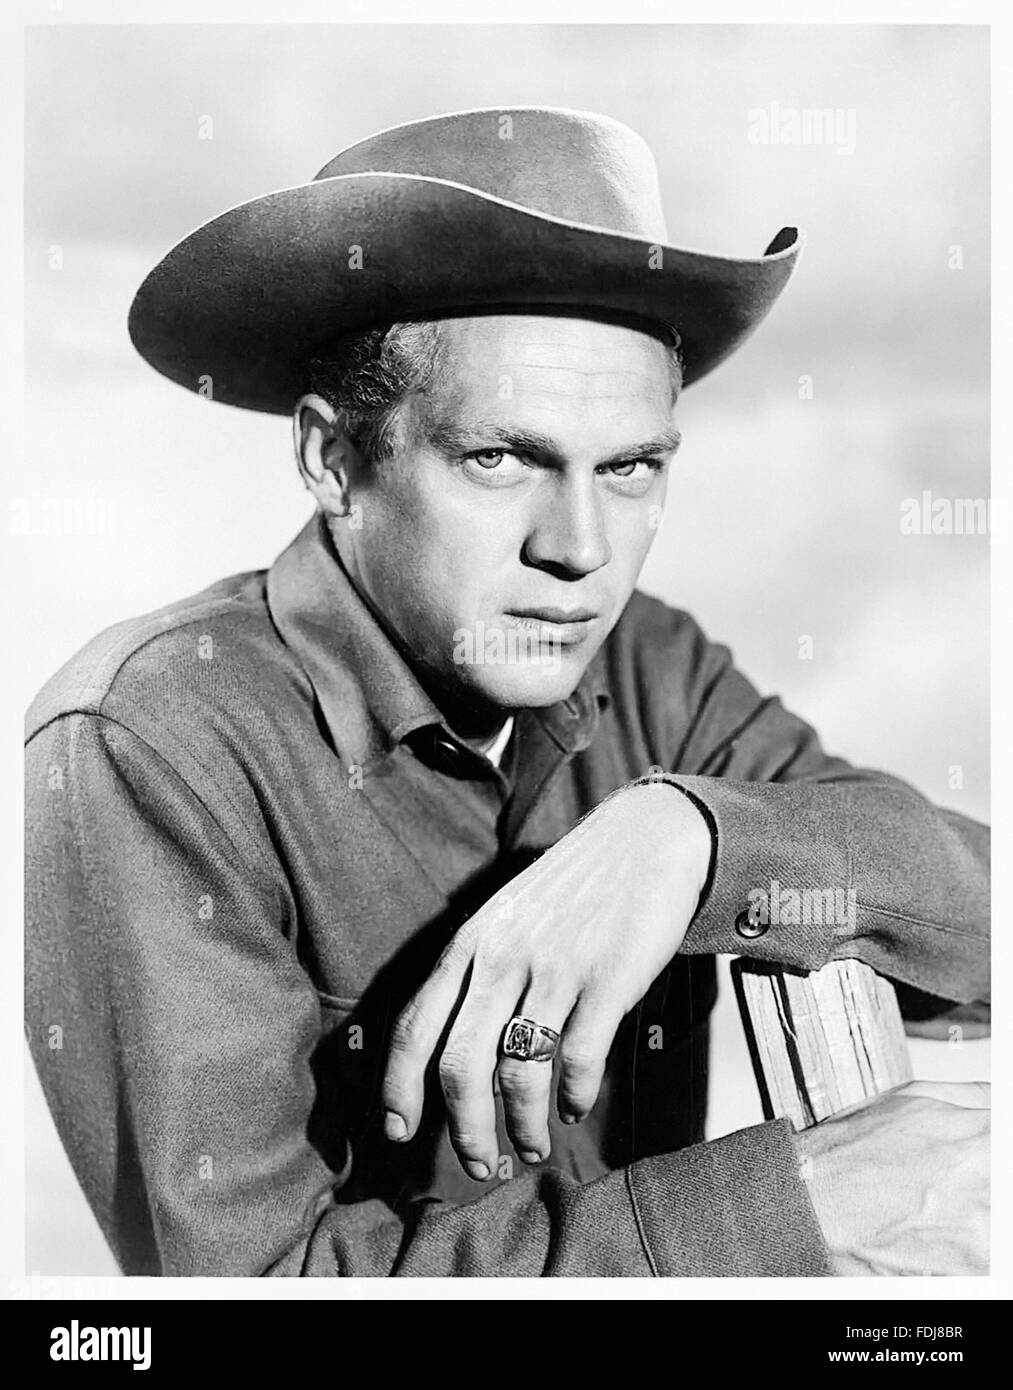 Publicity photograph of Steve McQueen (1930-1980) as the bounty hunter Josh Randall in 'Wanted: Dead or Alive' an American Western television series produced by CBS. The shows 3 seasons first aired 1958–61, McQueen was the first TV star to go to achieve comparable success on the big screen. See description for more information. Stock Photo